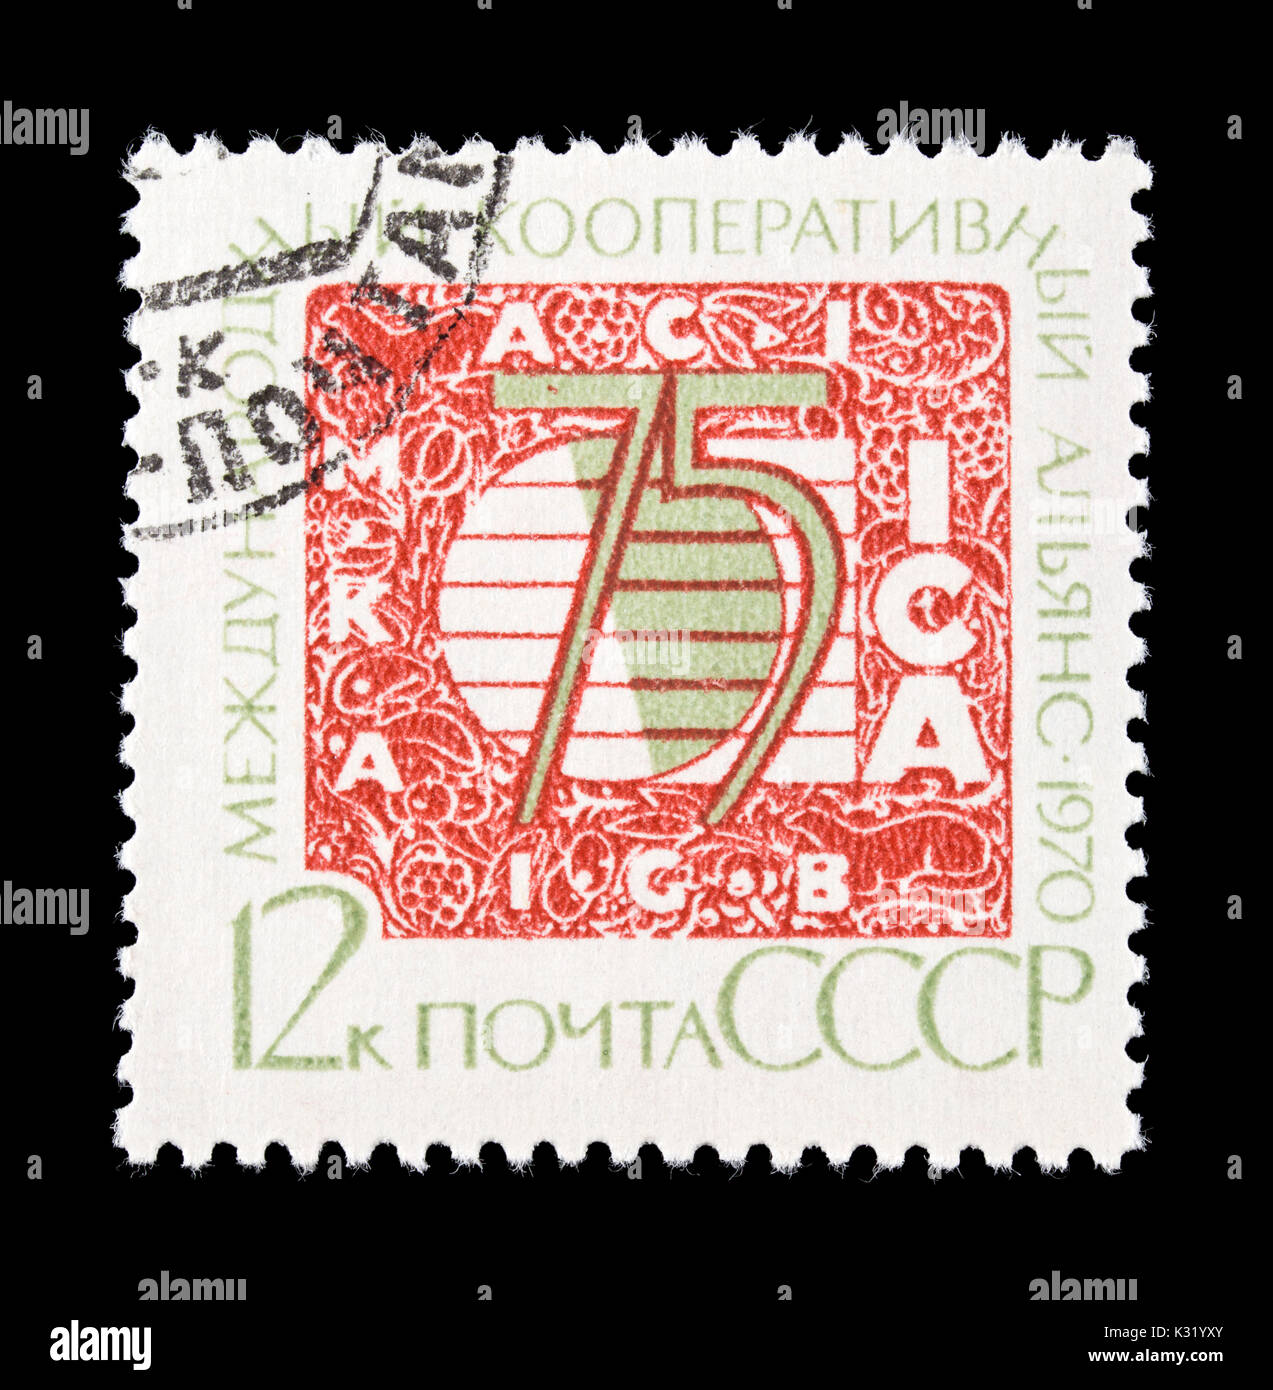 Postage stamp from the Soviet Union depicting symbols for the International Cooperative Alliance, 75th anniversary. Stock Photo